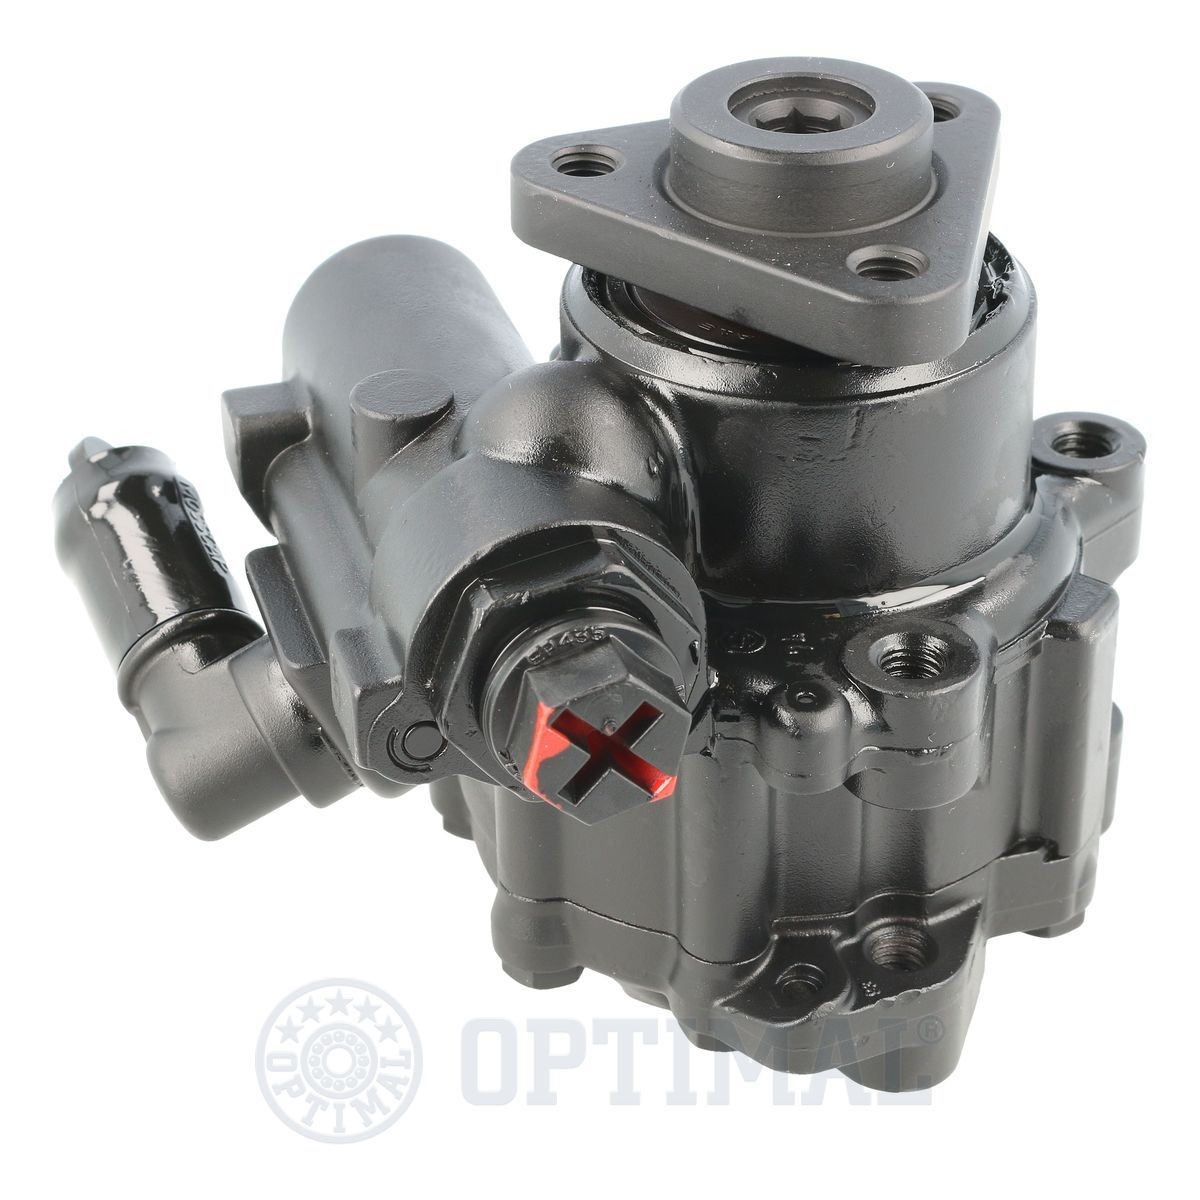 OPTIMAL Hydraulic steering pump HP-693 for AUDI A6, A4